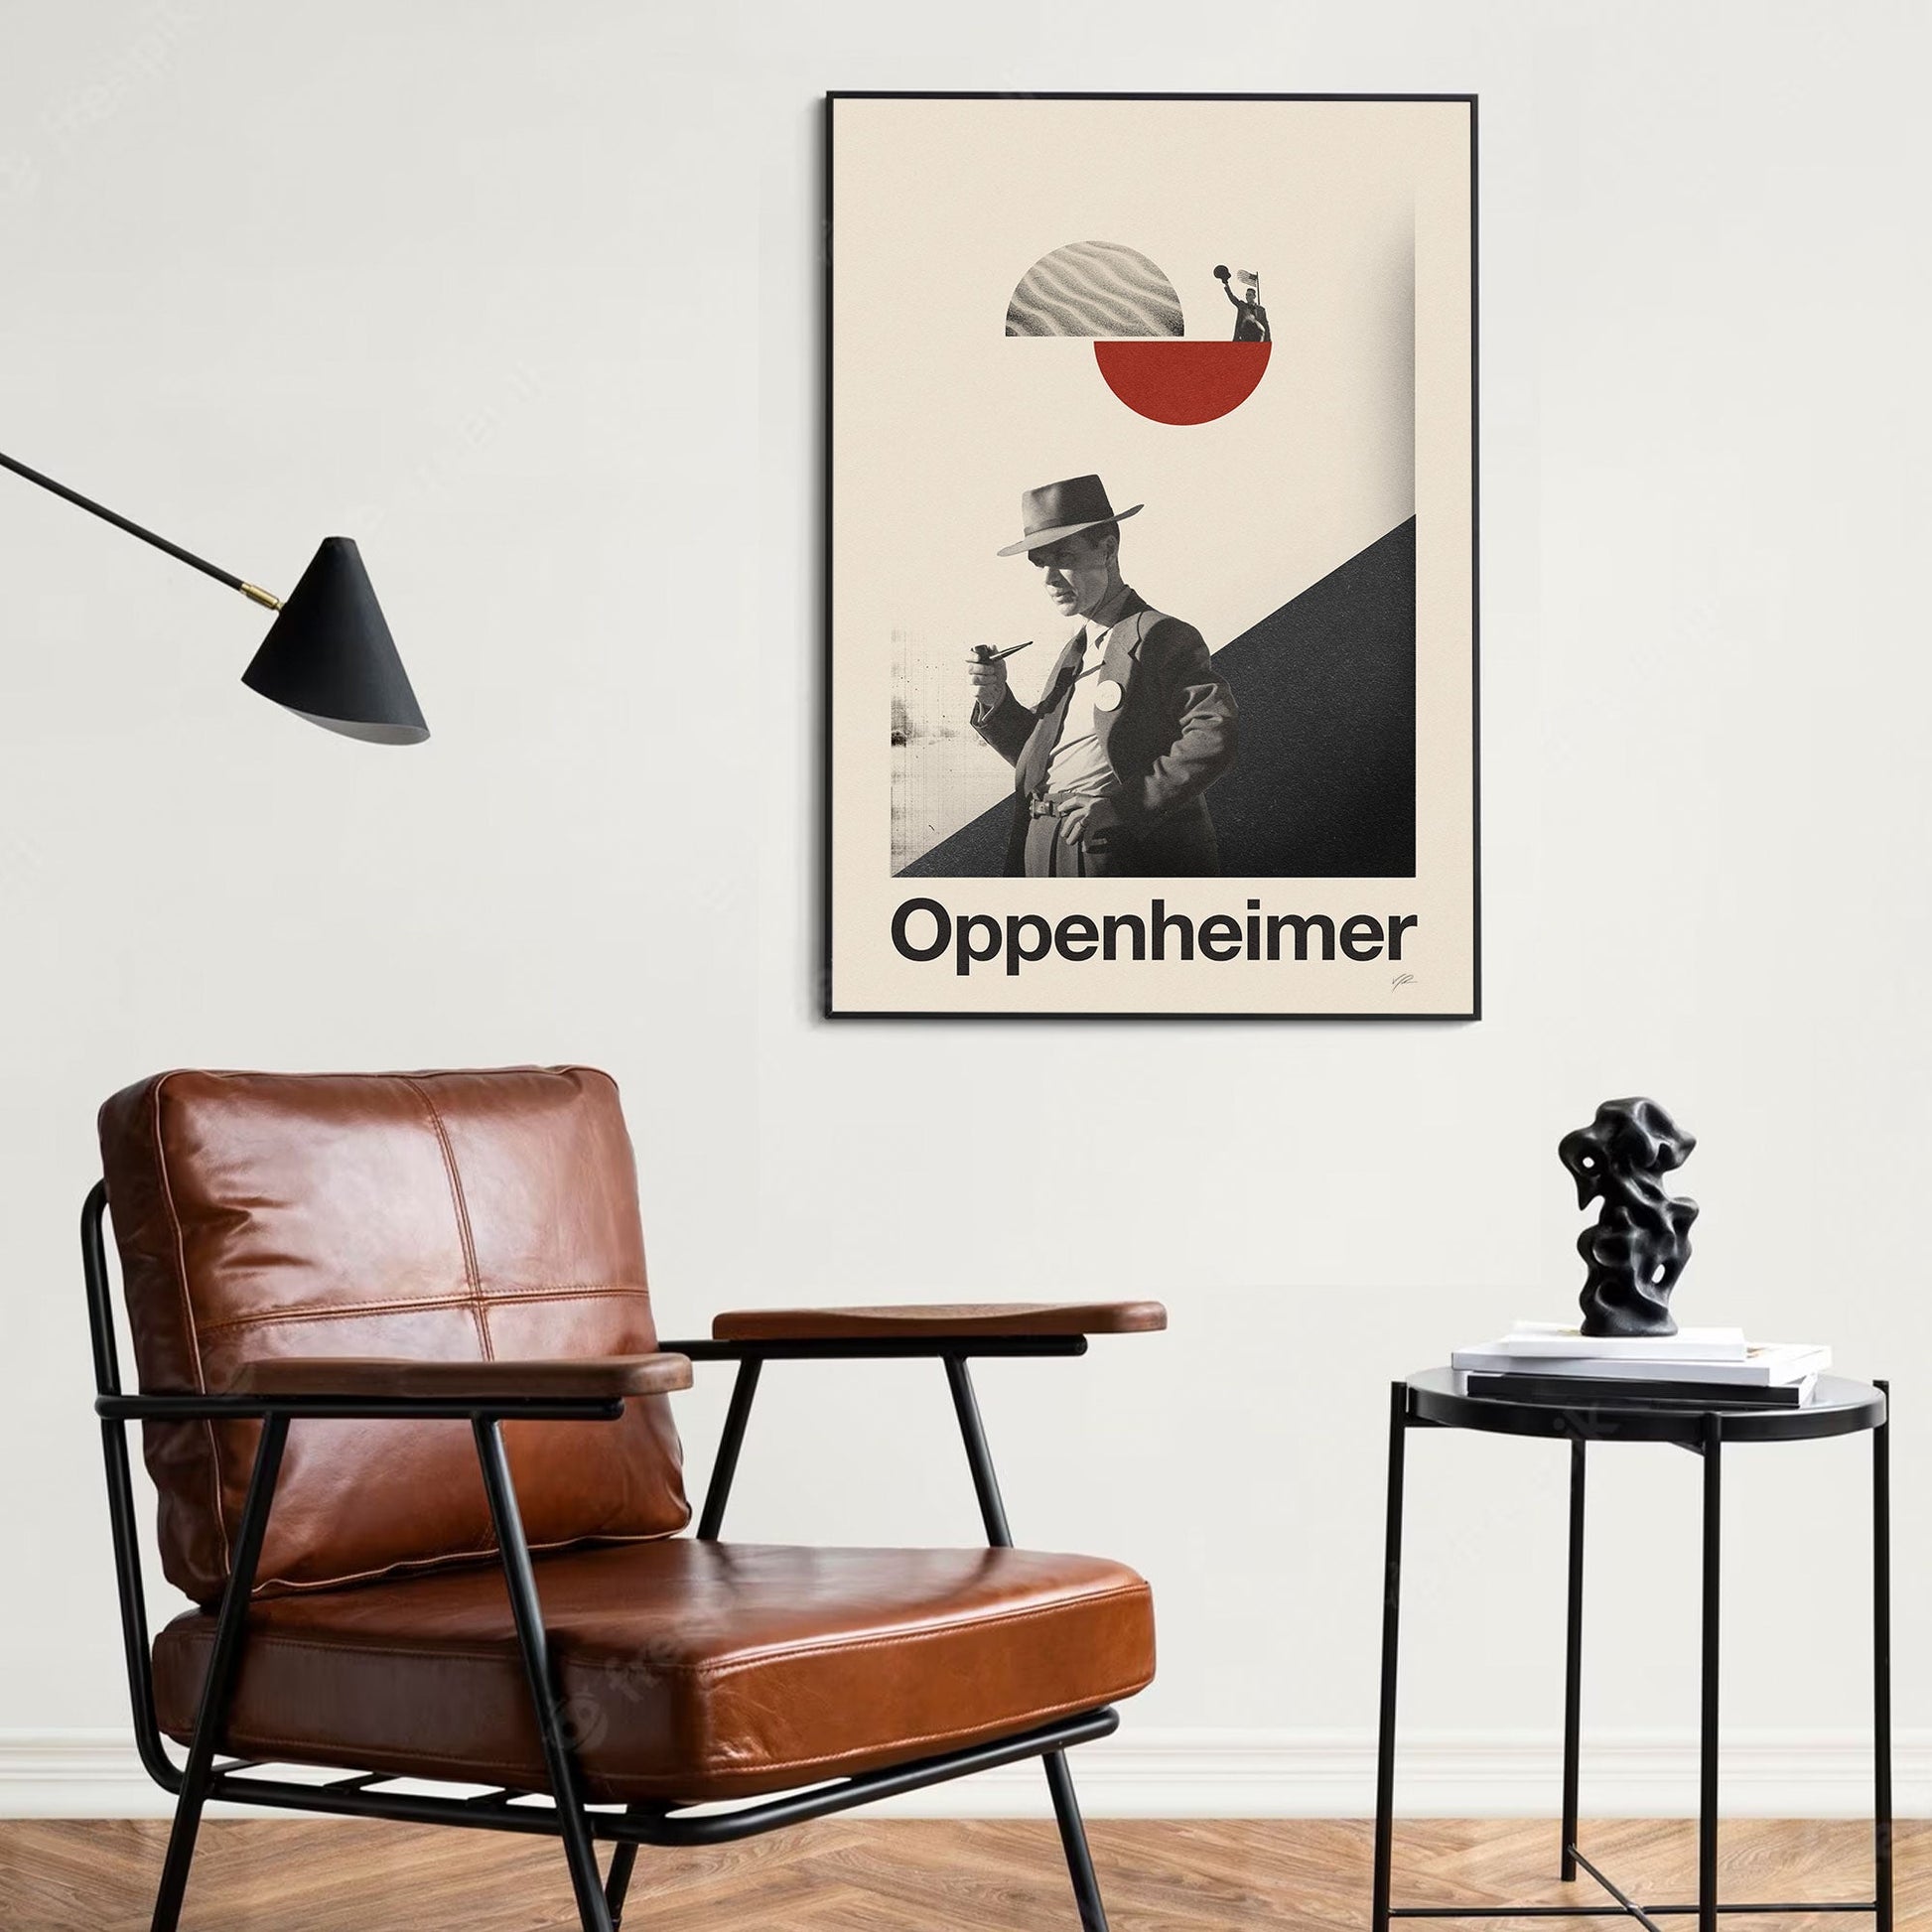 Poster of Oppenheimer movie by Christopher Nolan featuring a man in a hat smoking a cigar